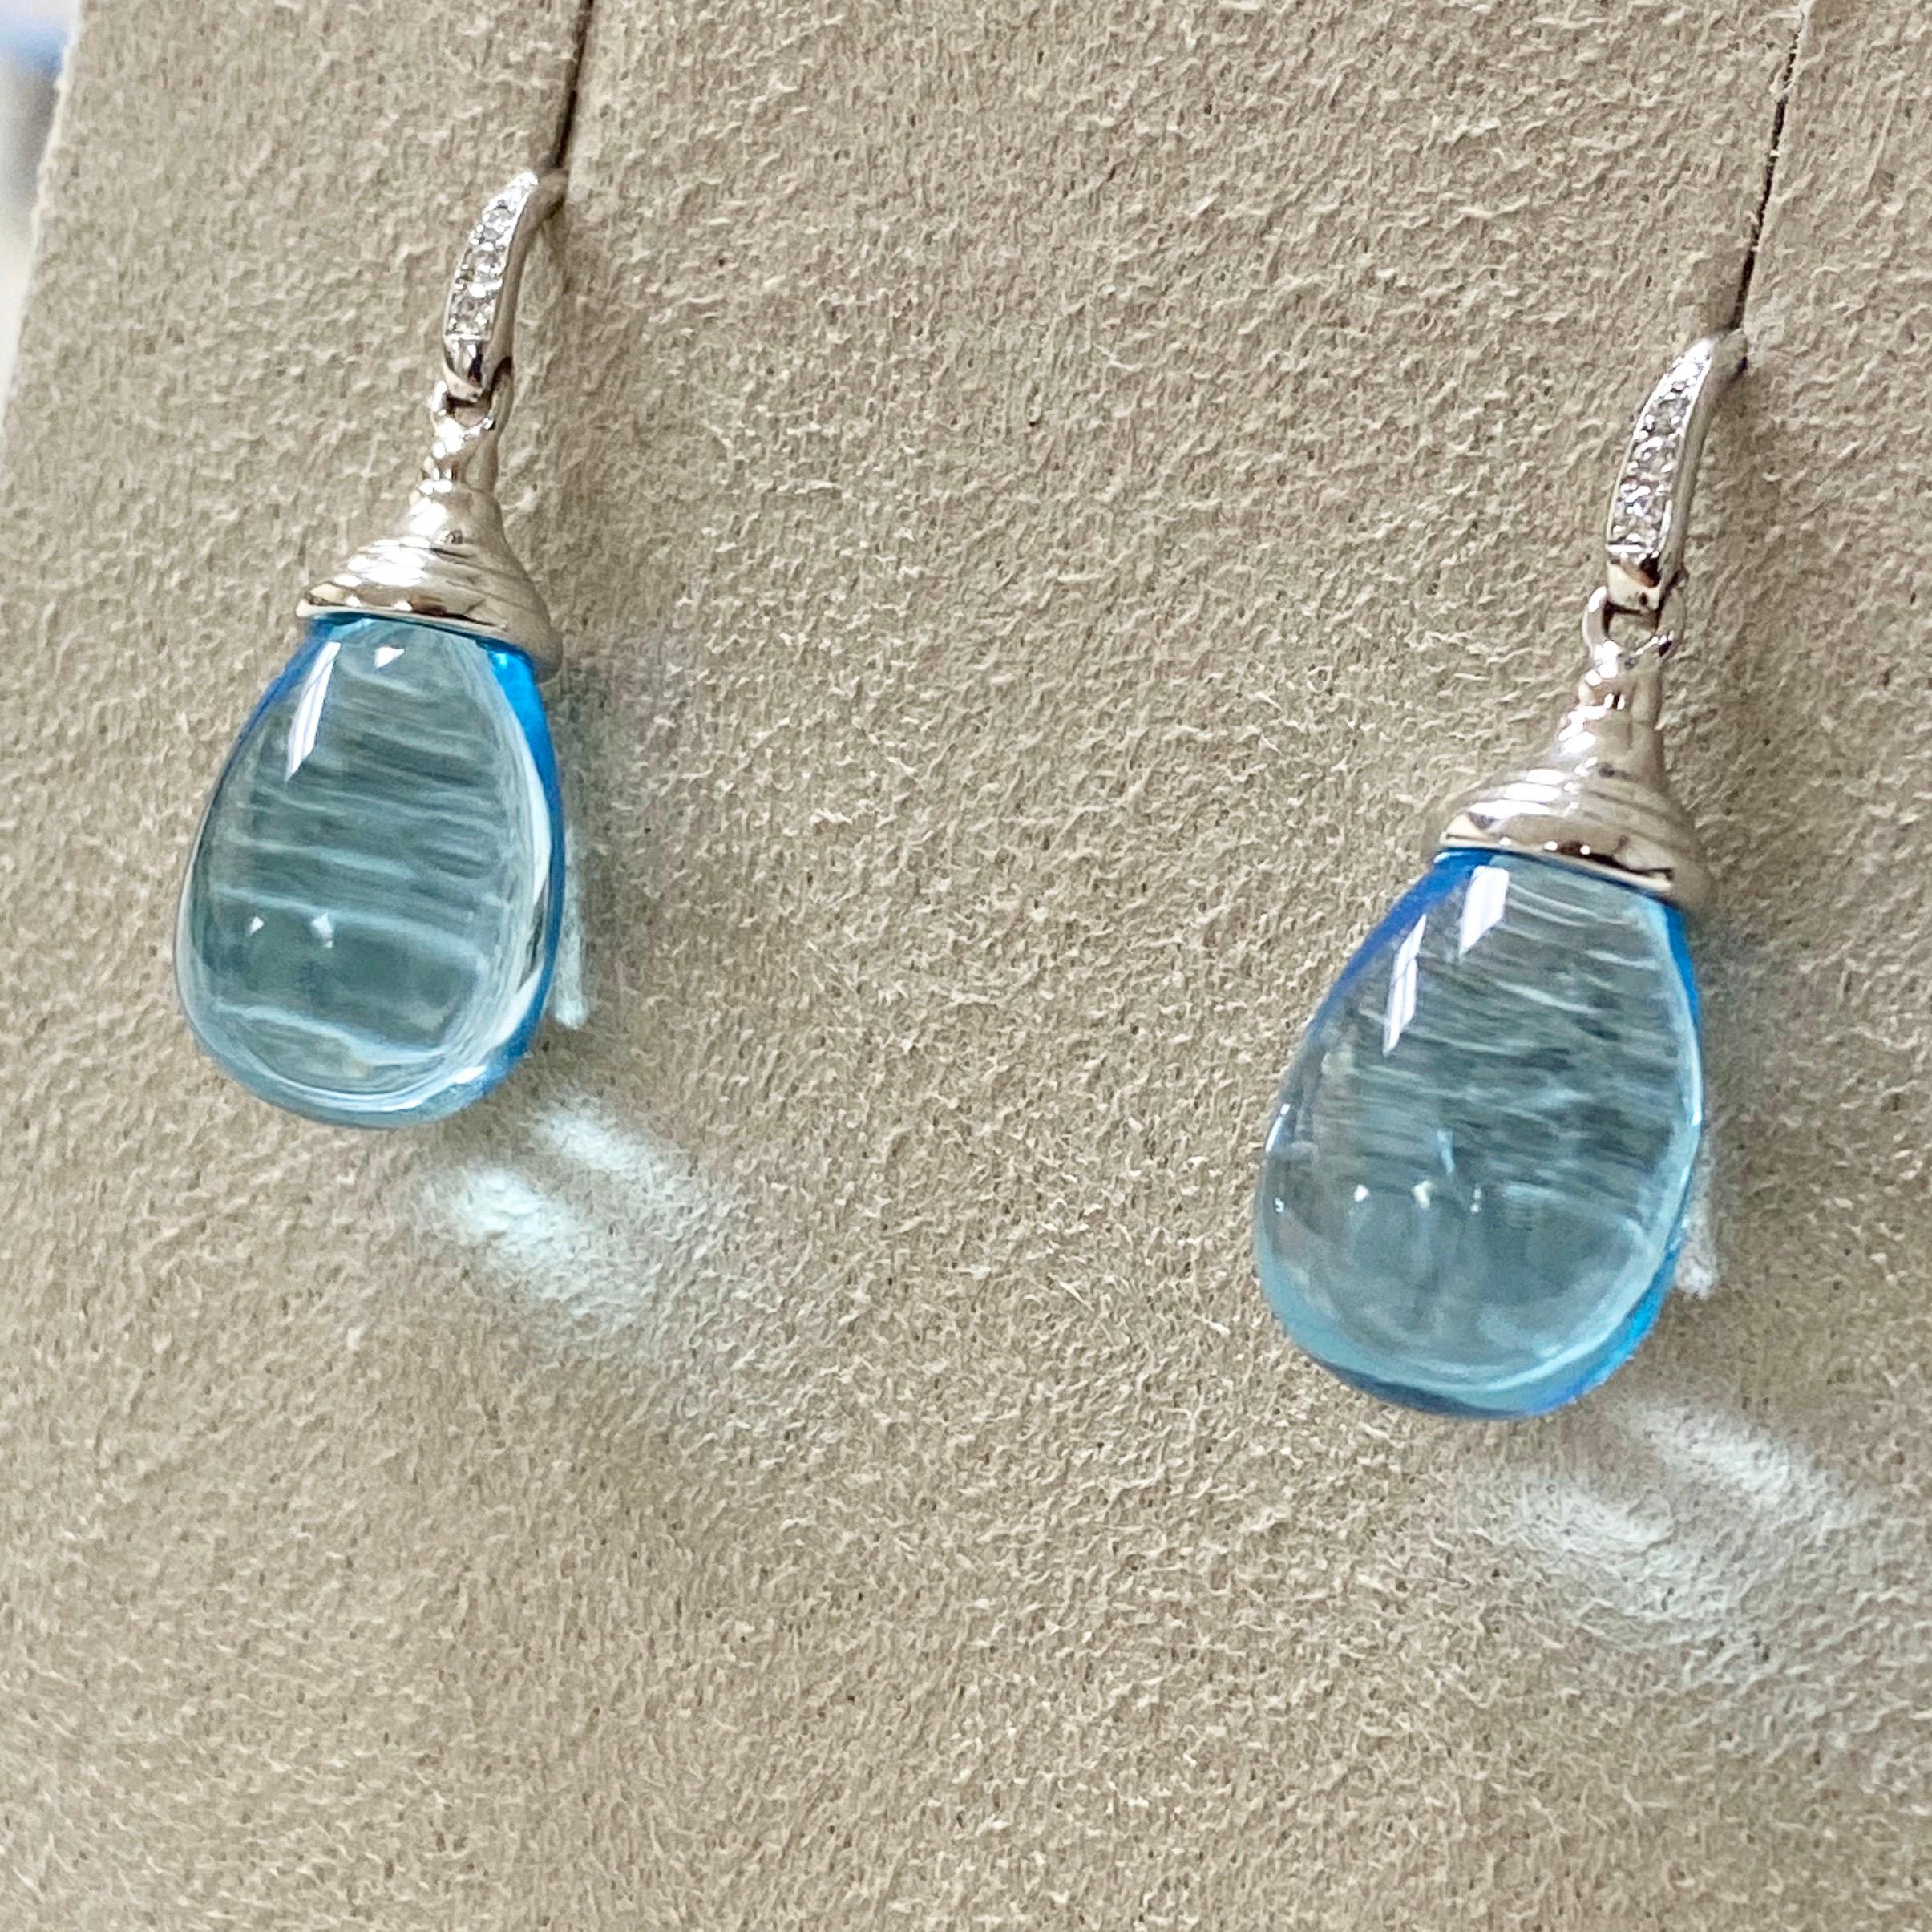 Created in 18kwg
Blue topaz drops 30 cts approx
Diamonds 0.05 cts approx

These Candy Blue Topaz & Diamond Earrings are an exquisite marriage of 18kwg artistry and gemstone splendor. Exquisitely crafted with blue topaz drops of approximately 30cts